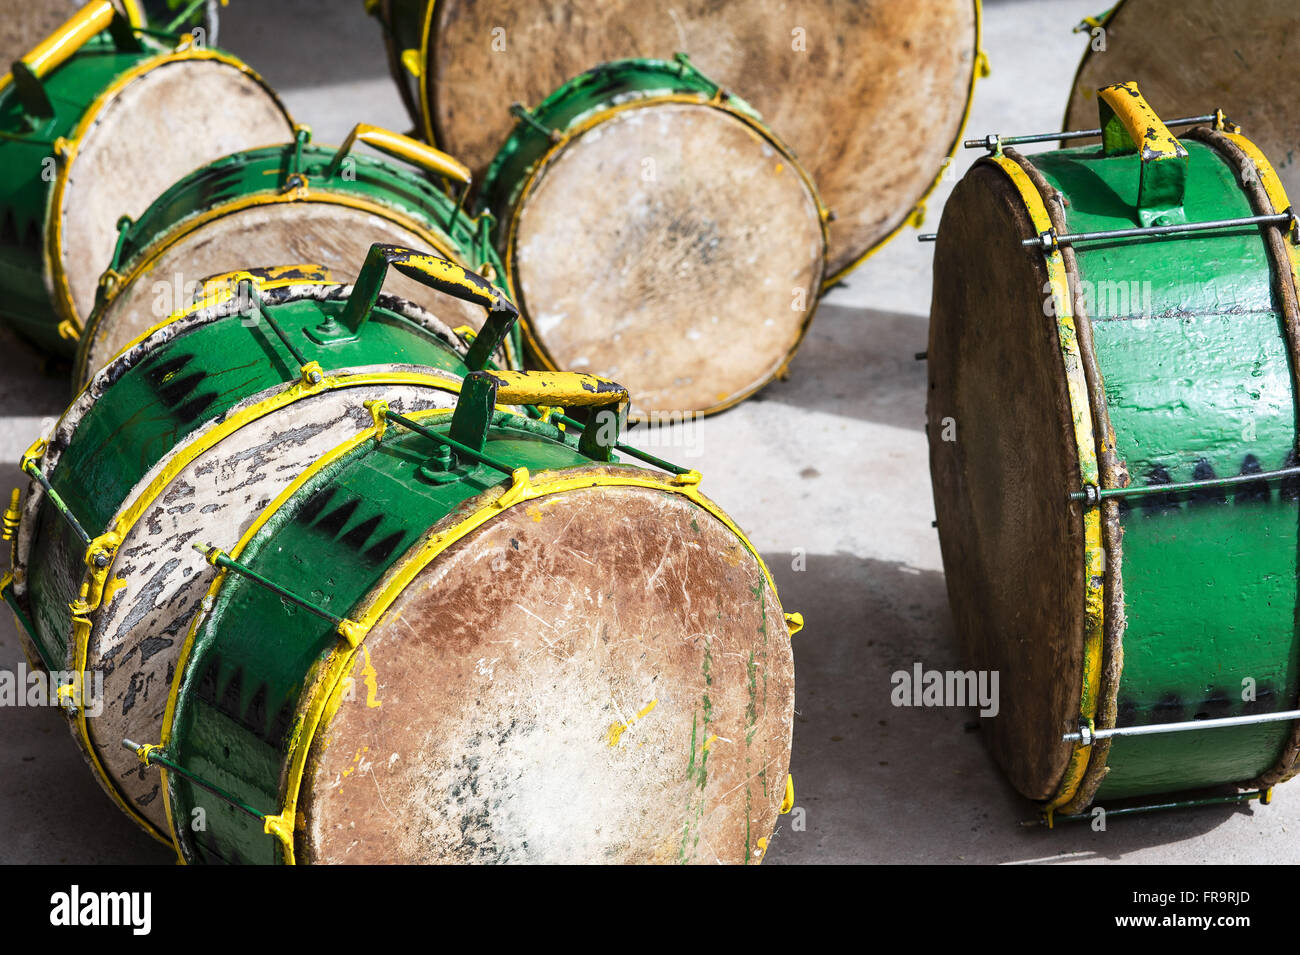 Drums in the Feast of Our Lady of the Rosary Stock Photo